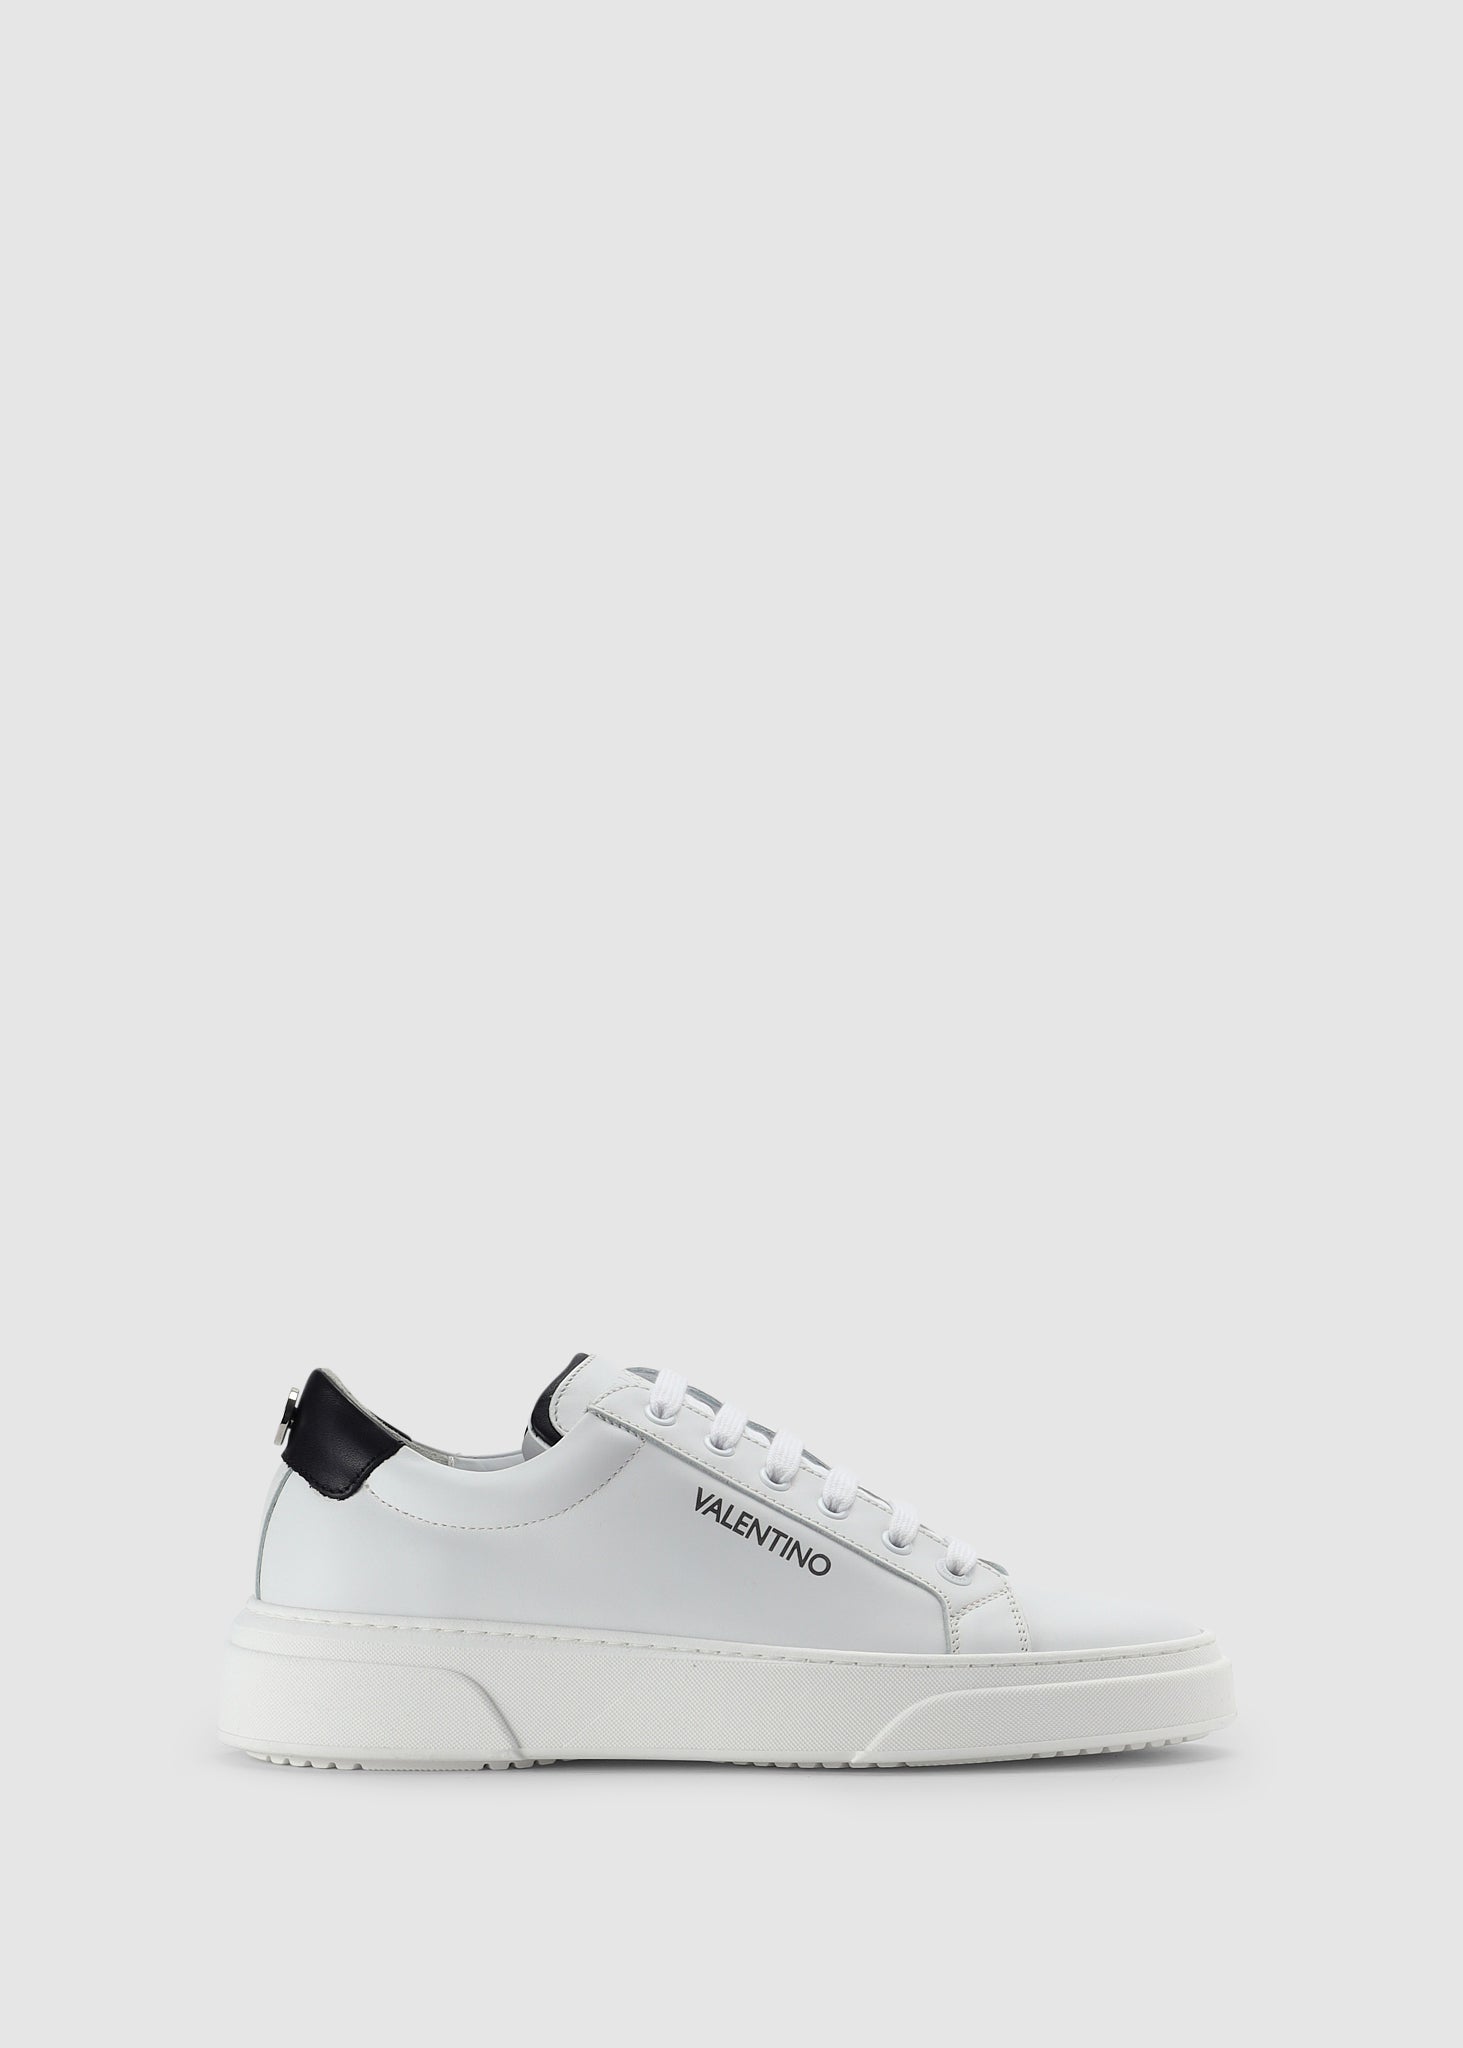 Image of Valentino Shoes Mens Stan Summer Lace Up Trainers In White/Black